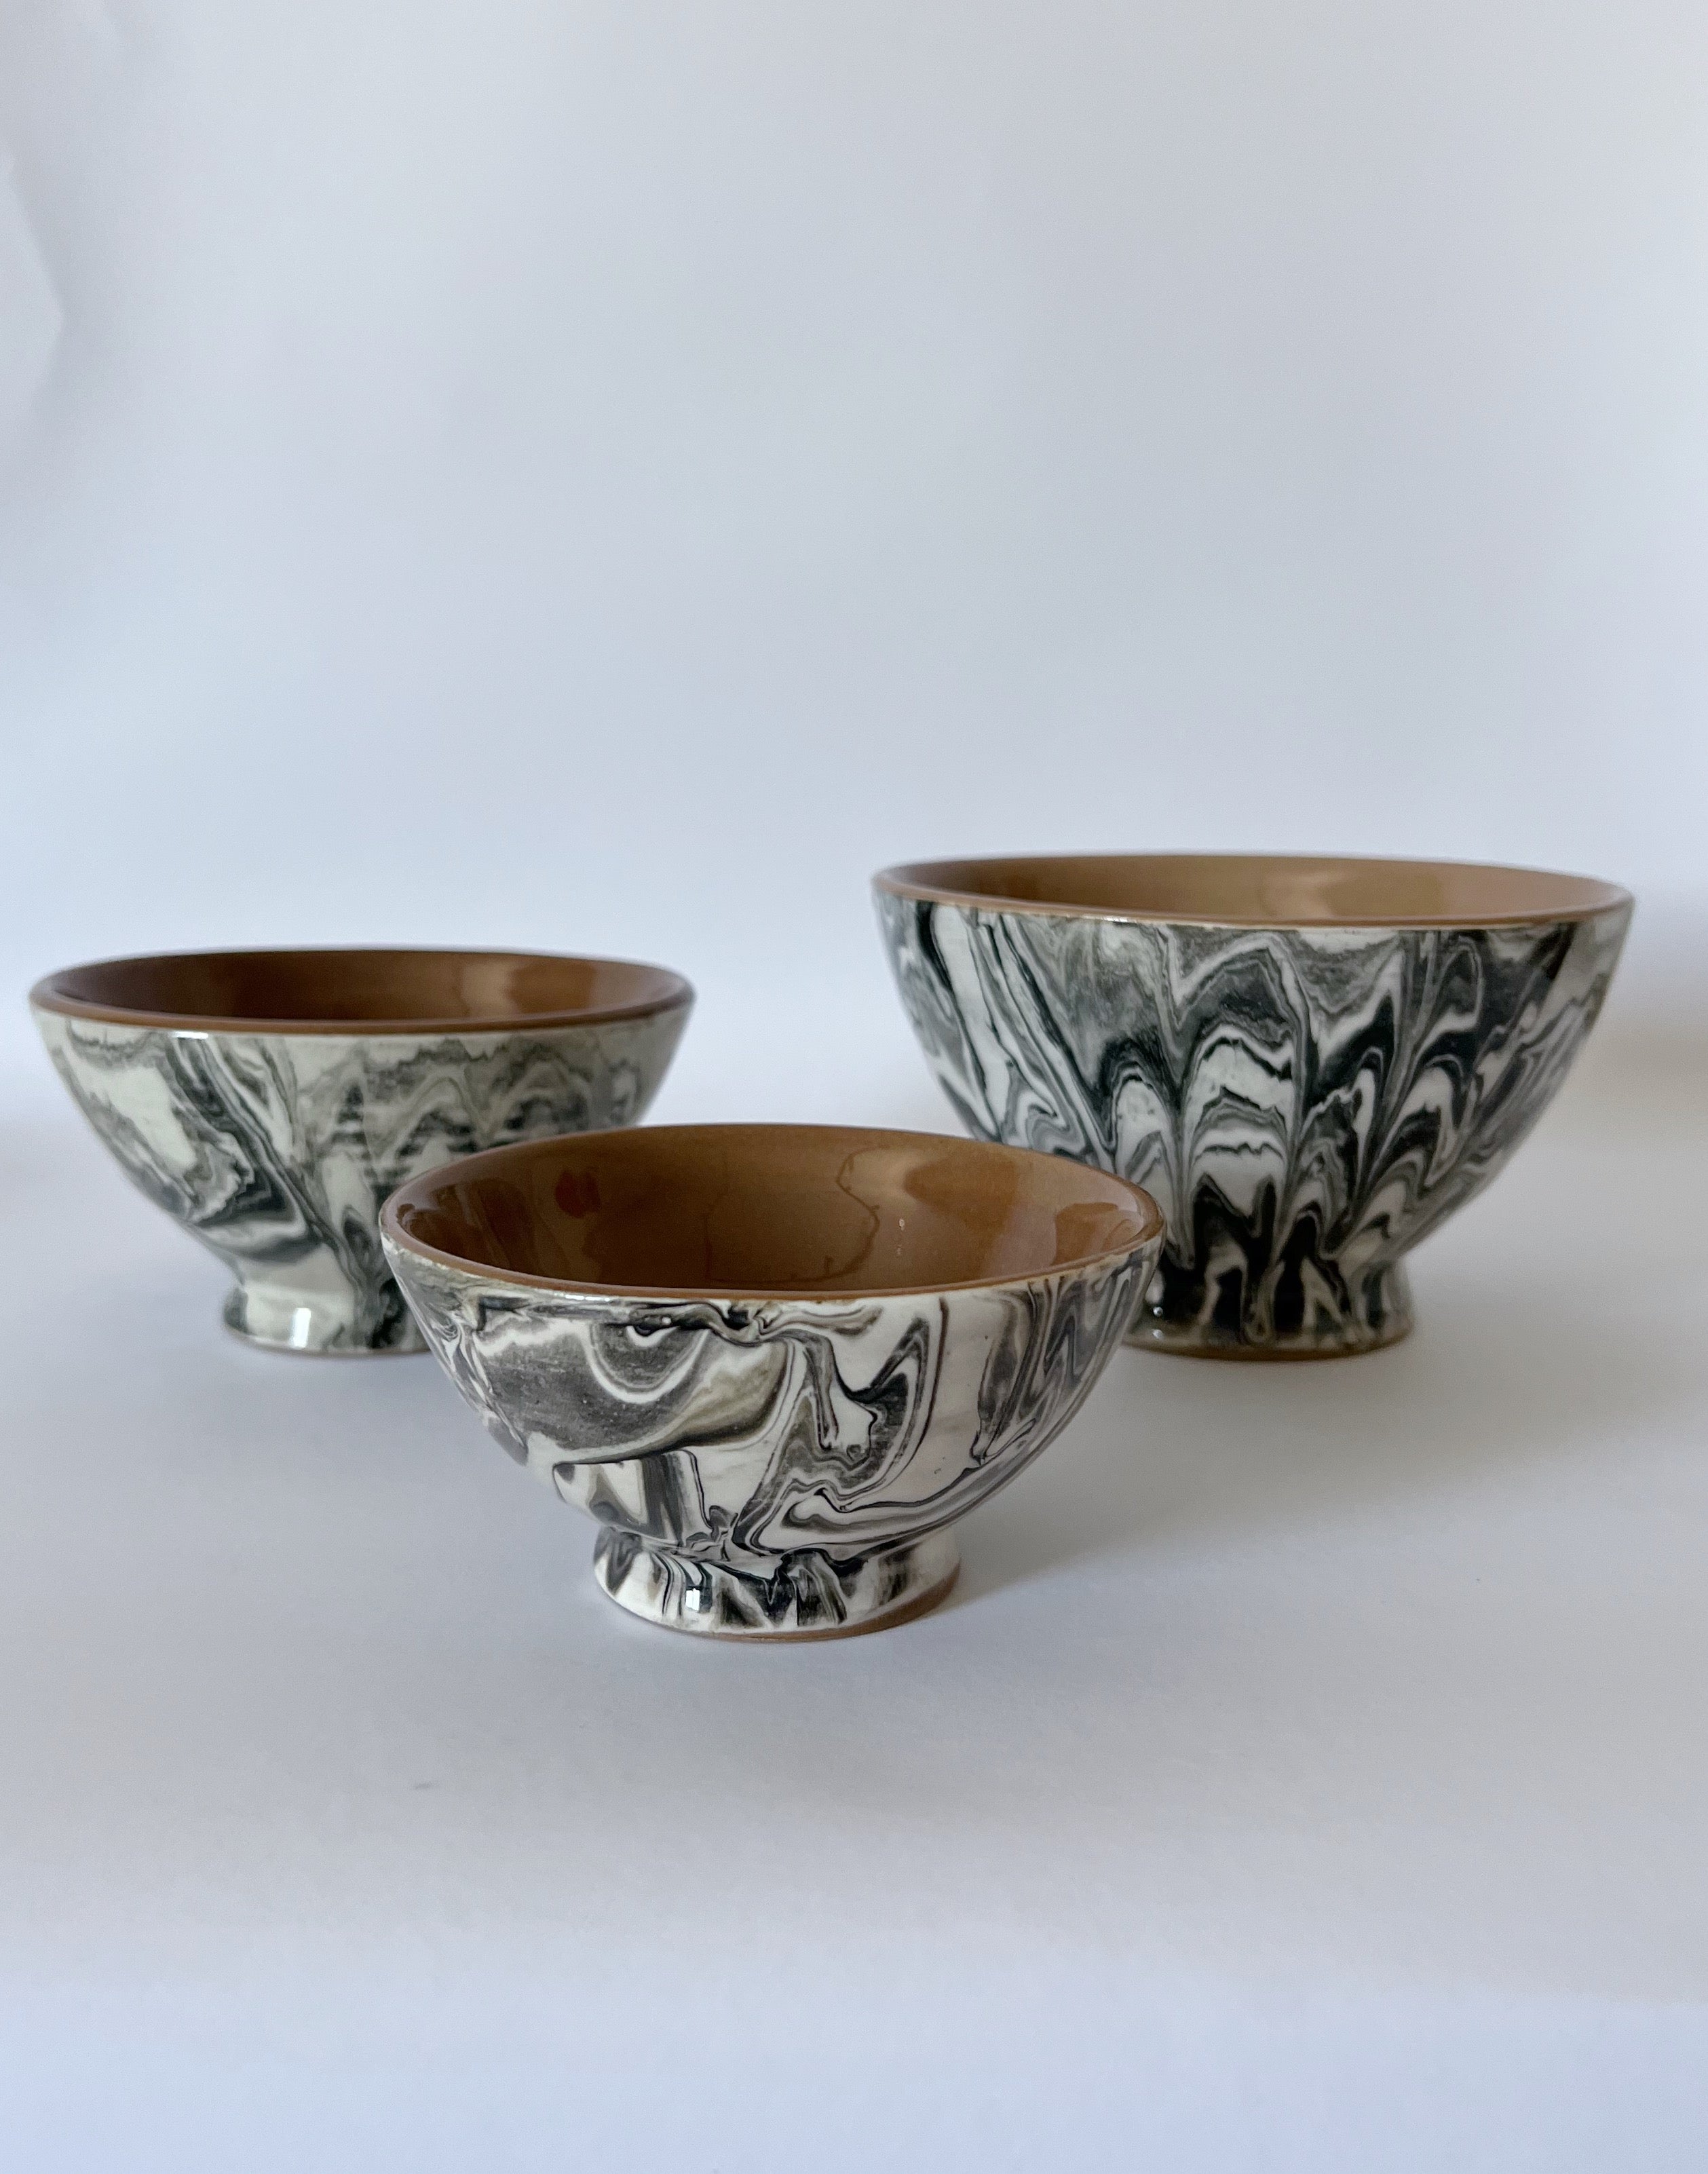 Une Vie Nomade Small Swirled Bowls—Black Une Vie Nomade new arrivals 2023 304A75B1-4863-4B77-B1B5-1D0342DC290D_2a04b5ab-1860-44b1-91fe-e53bd067a58b